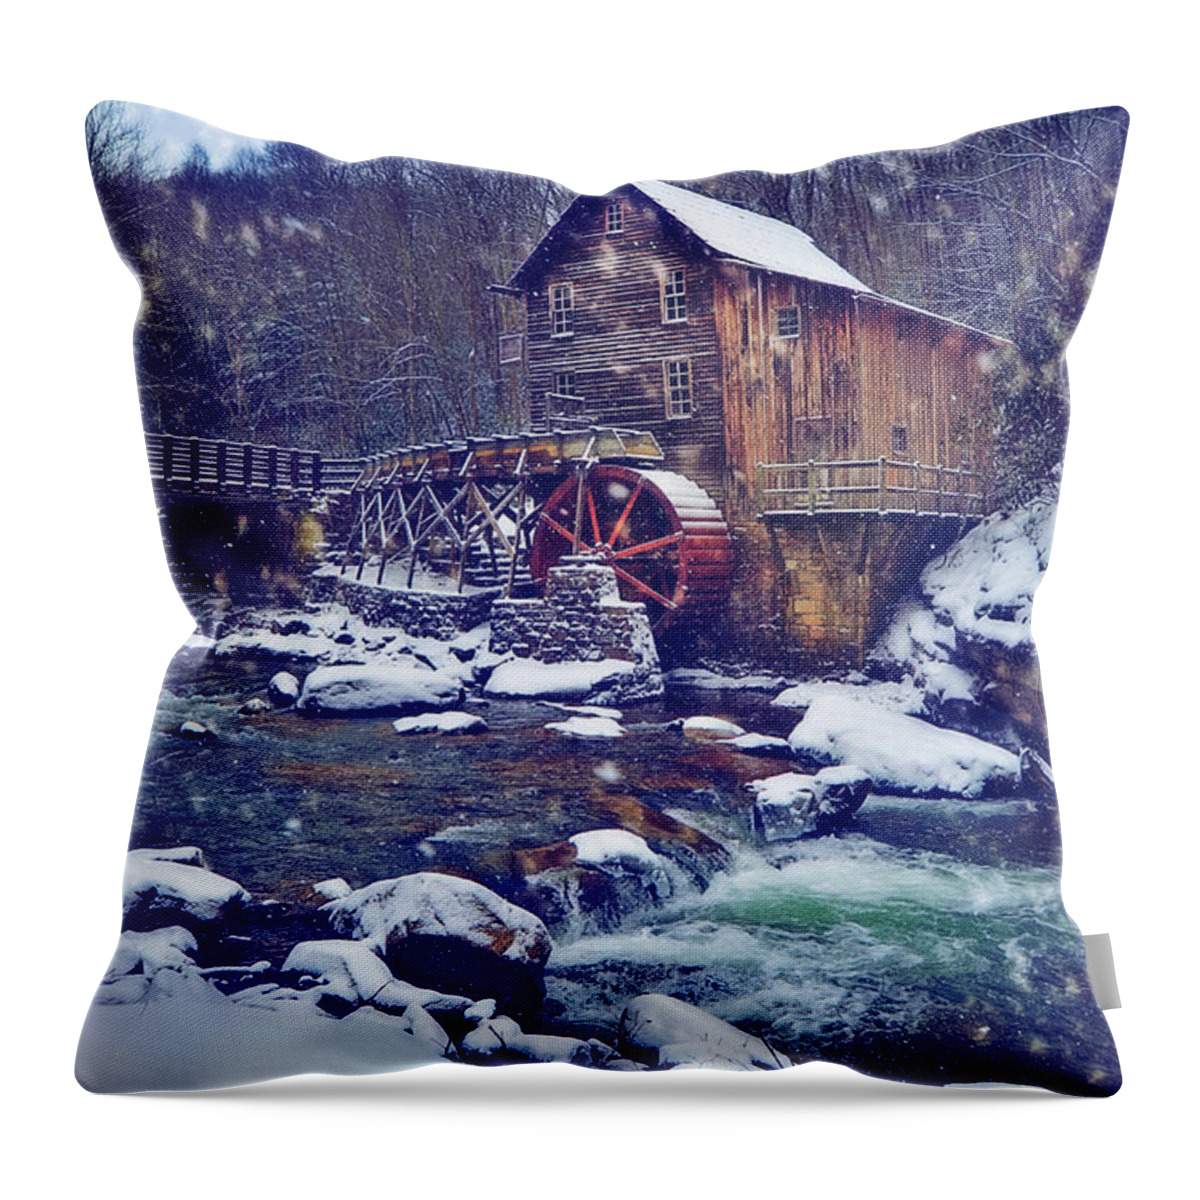 Privacy Throw Pillow featuring the photograph Winter Begins by Lisa Lambert-Shank